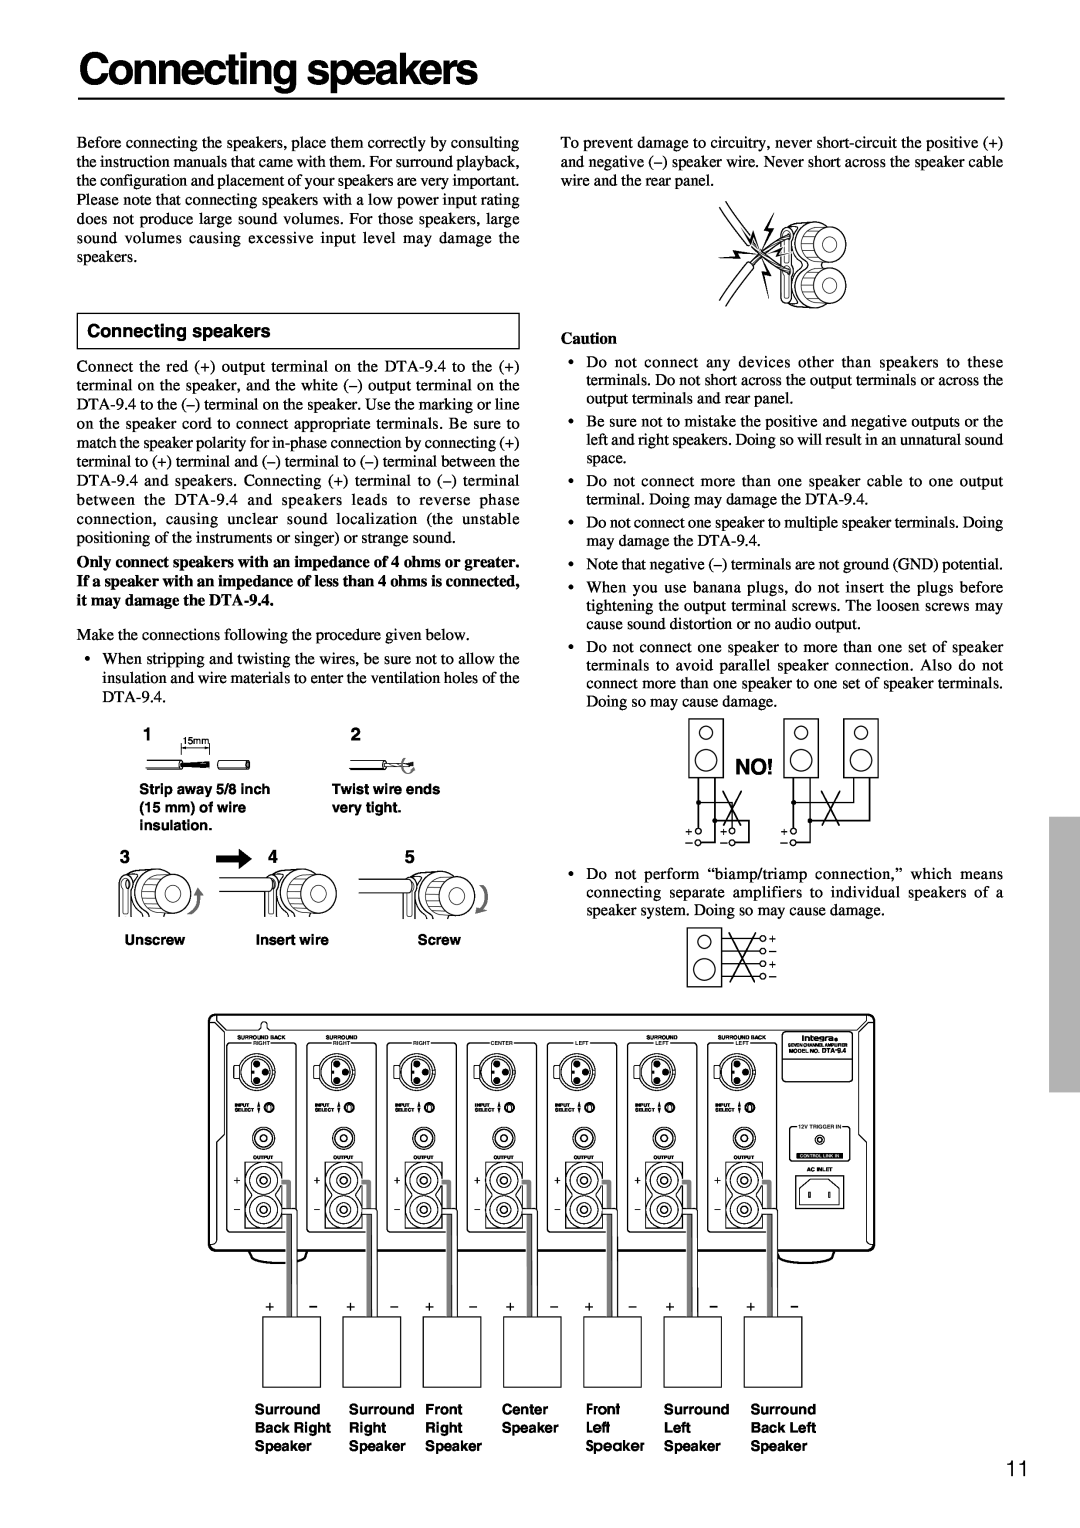 Integra DTA-9.4 instruction manual Connecting speakers 